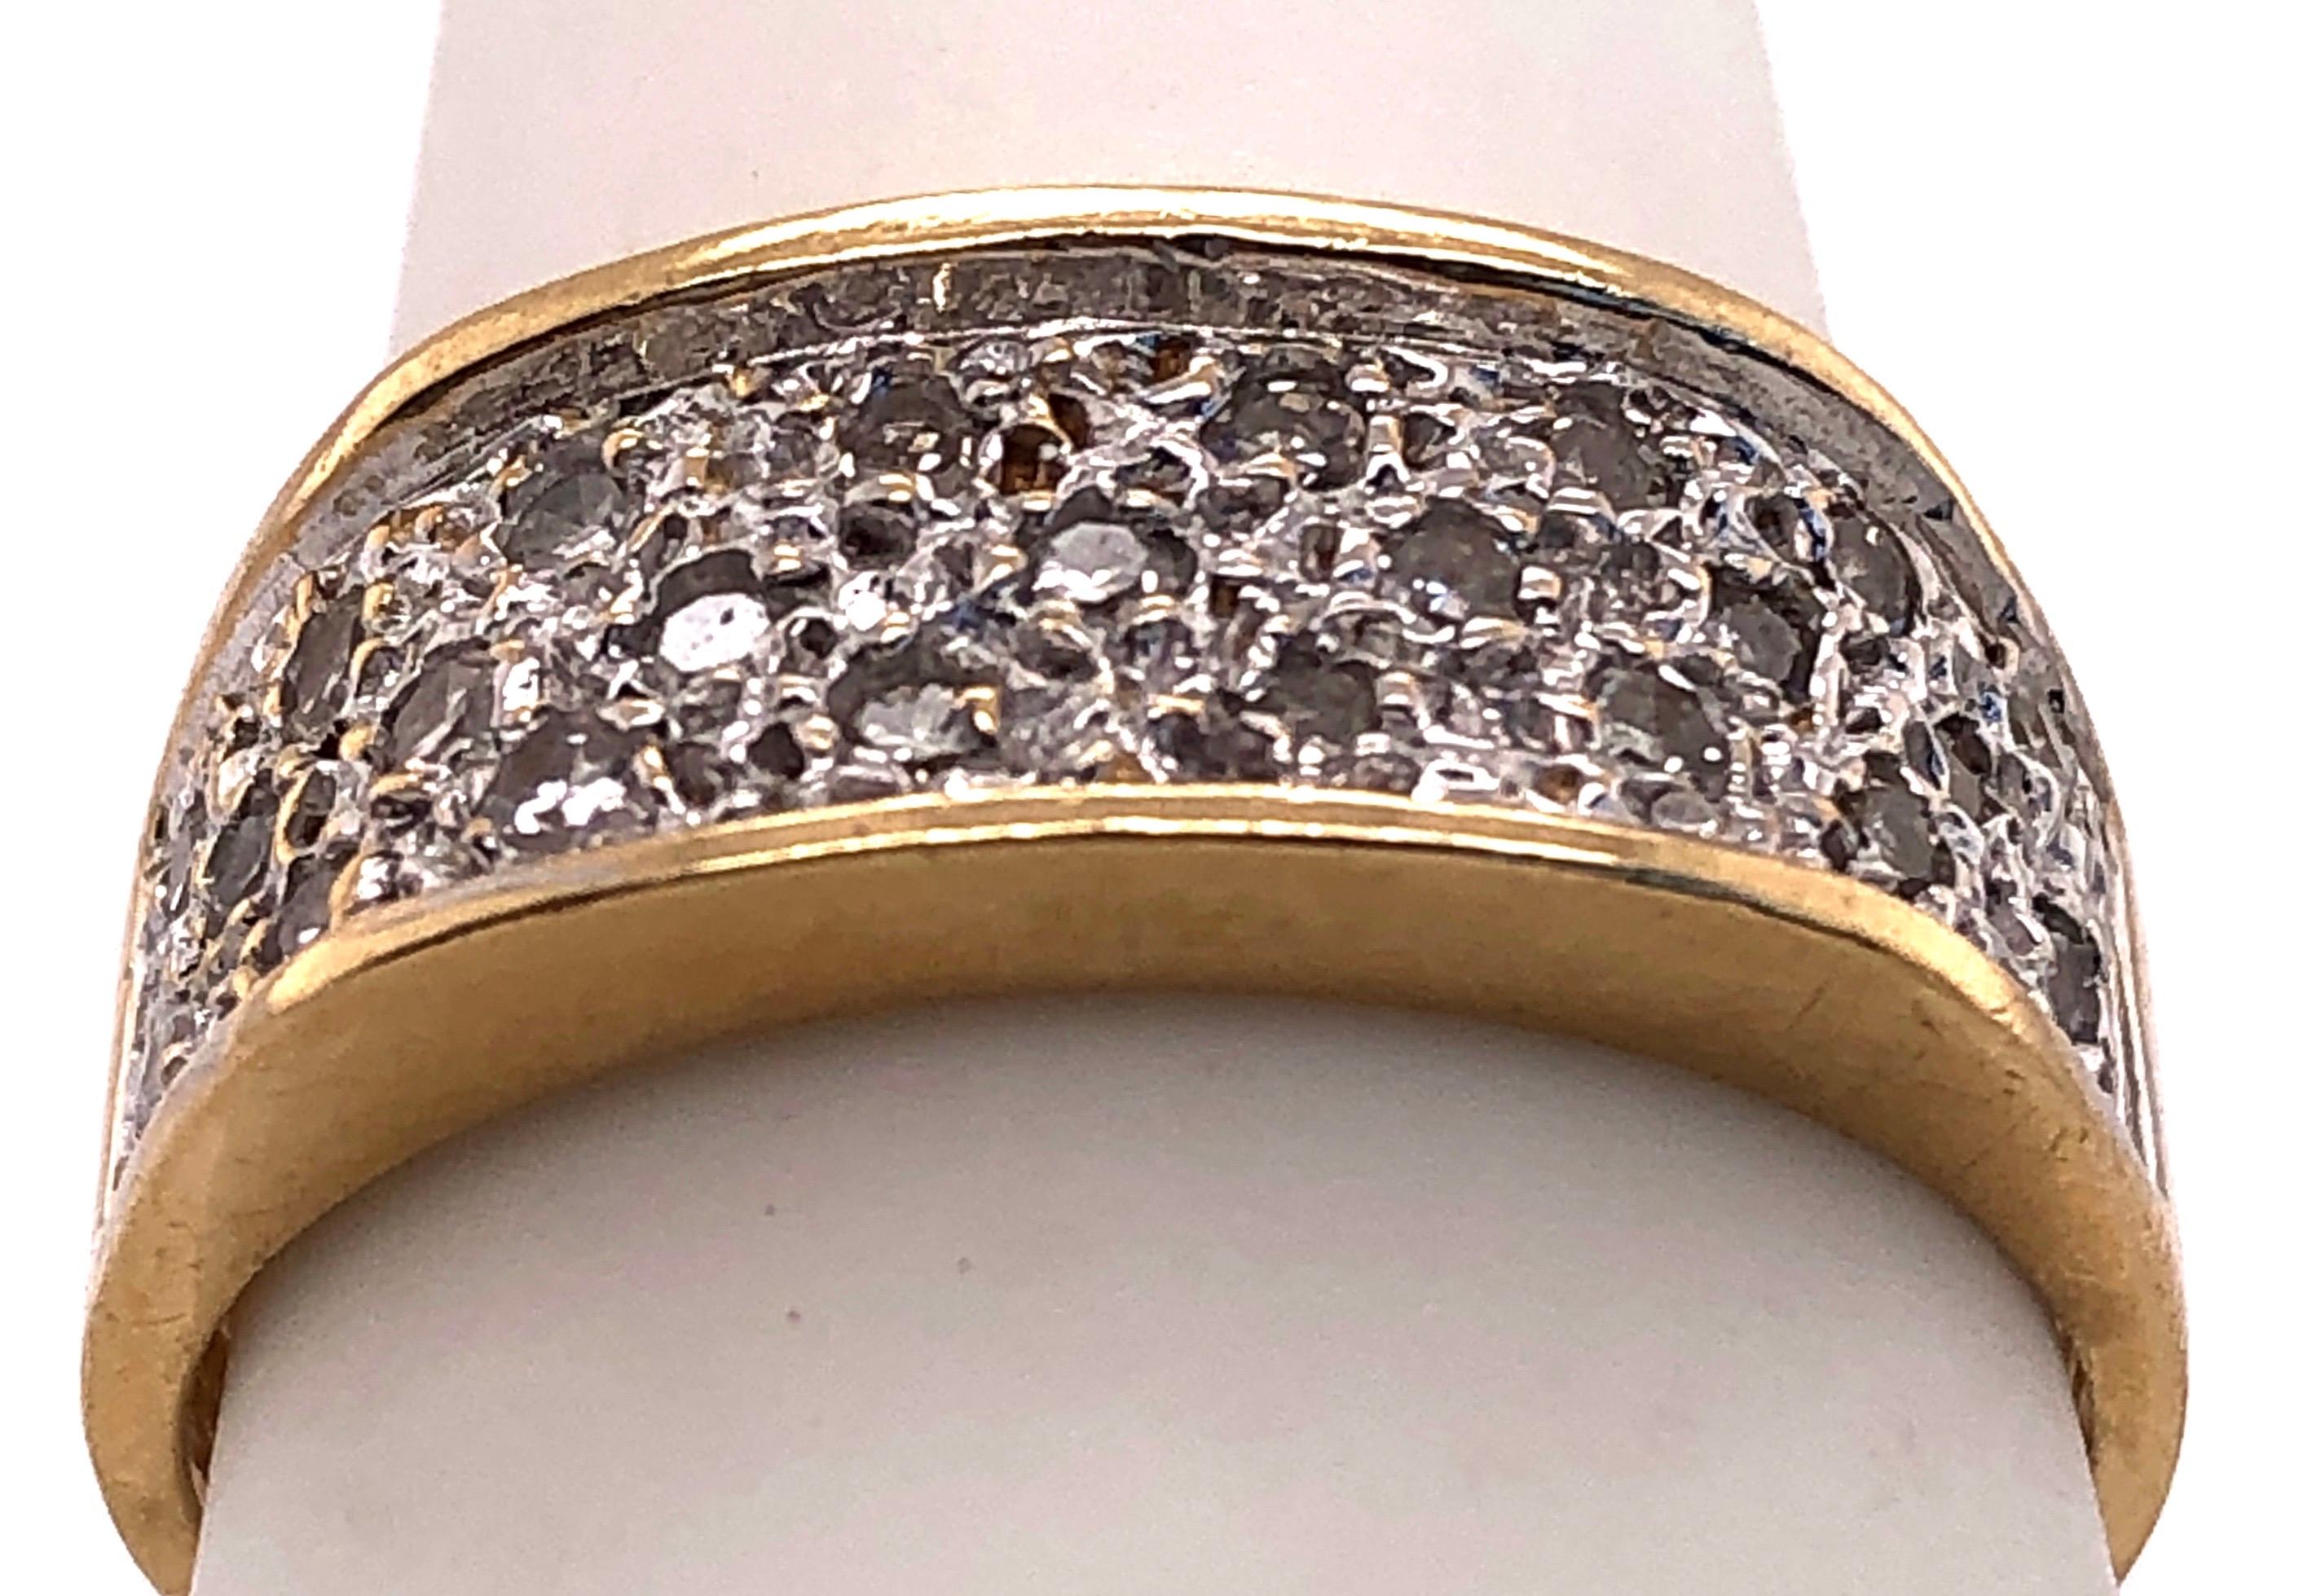 14 Kt Yellow Gold And Diamond Encrusted Fashion Ring 
0.50 Total Diamond Weight.
Size 7.5 with 4 grams total weight.